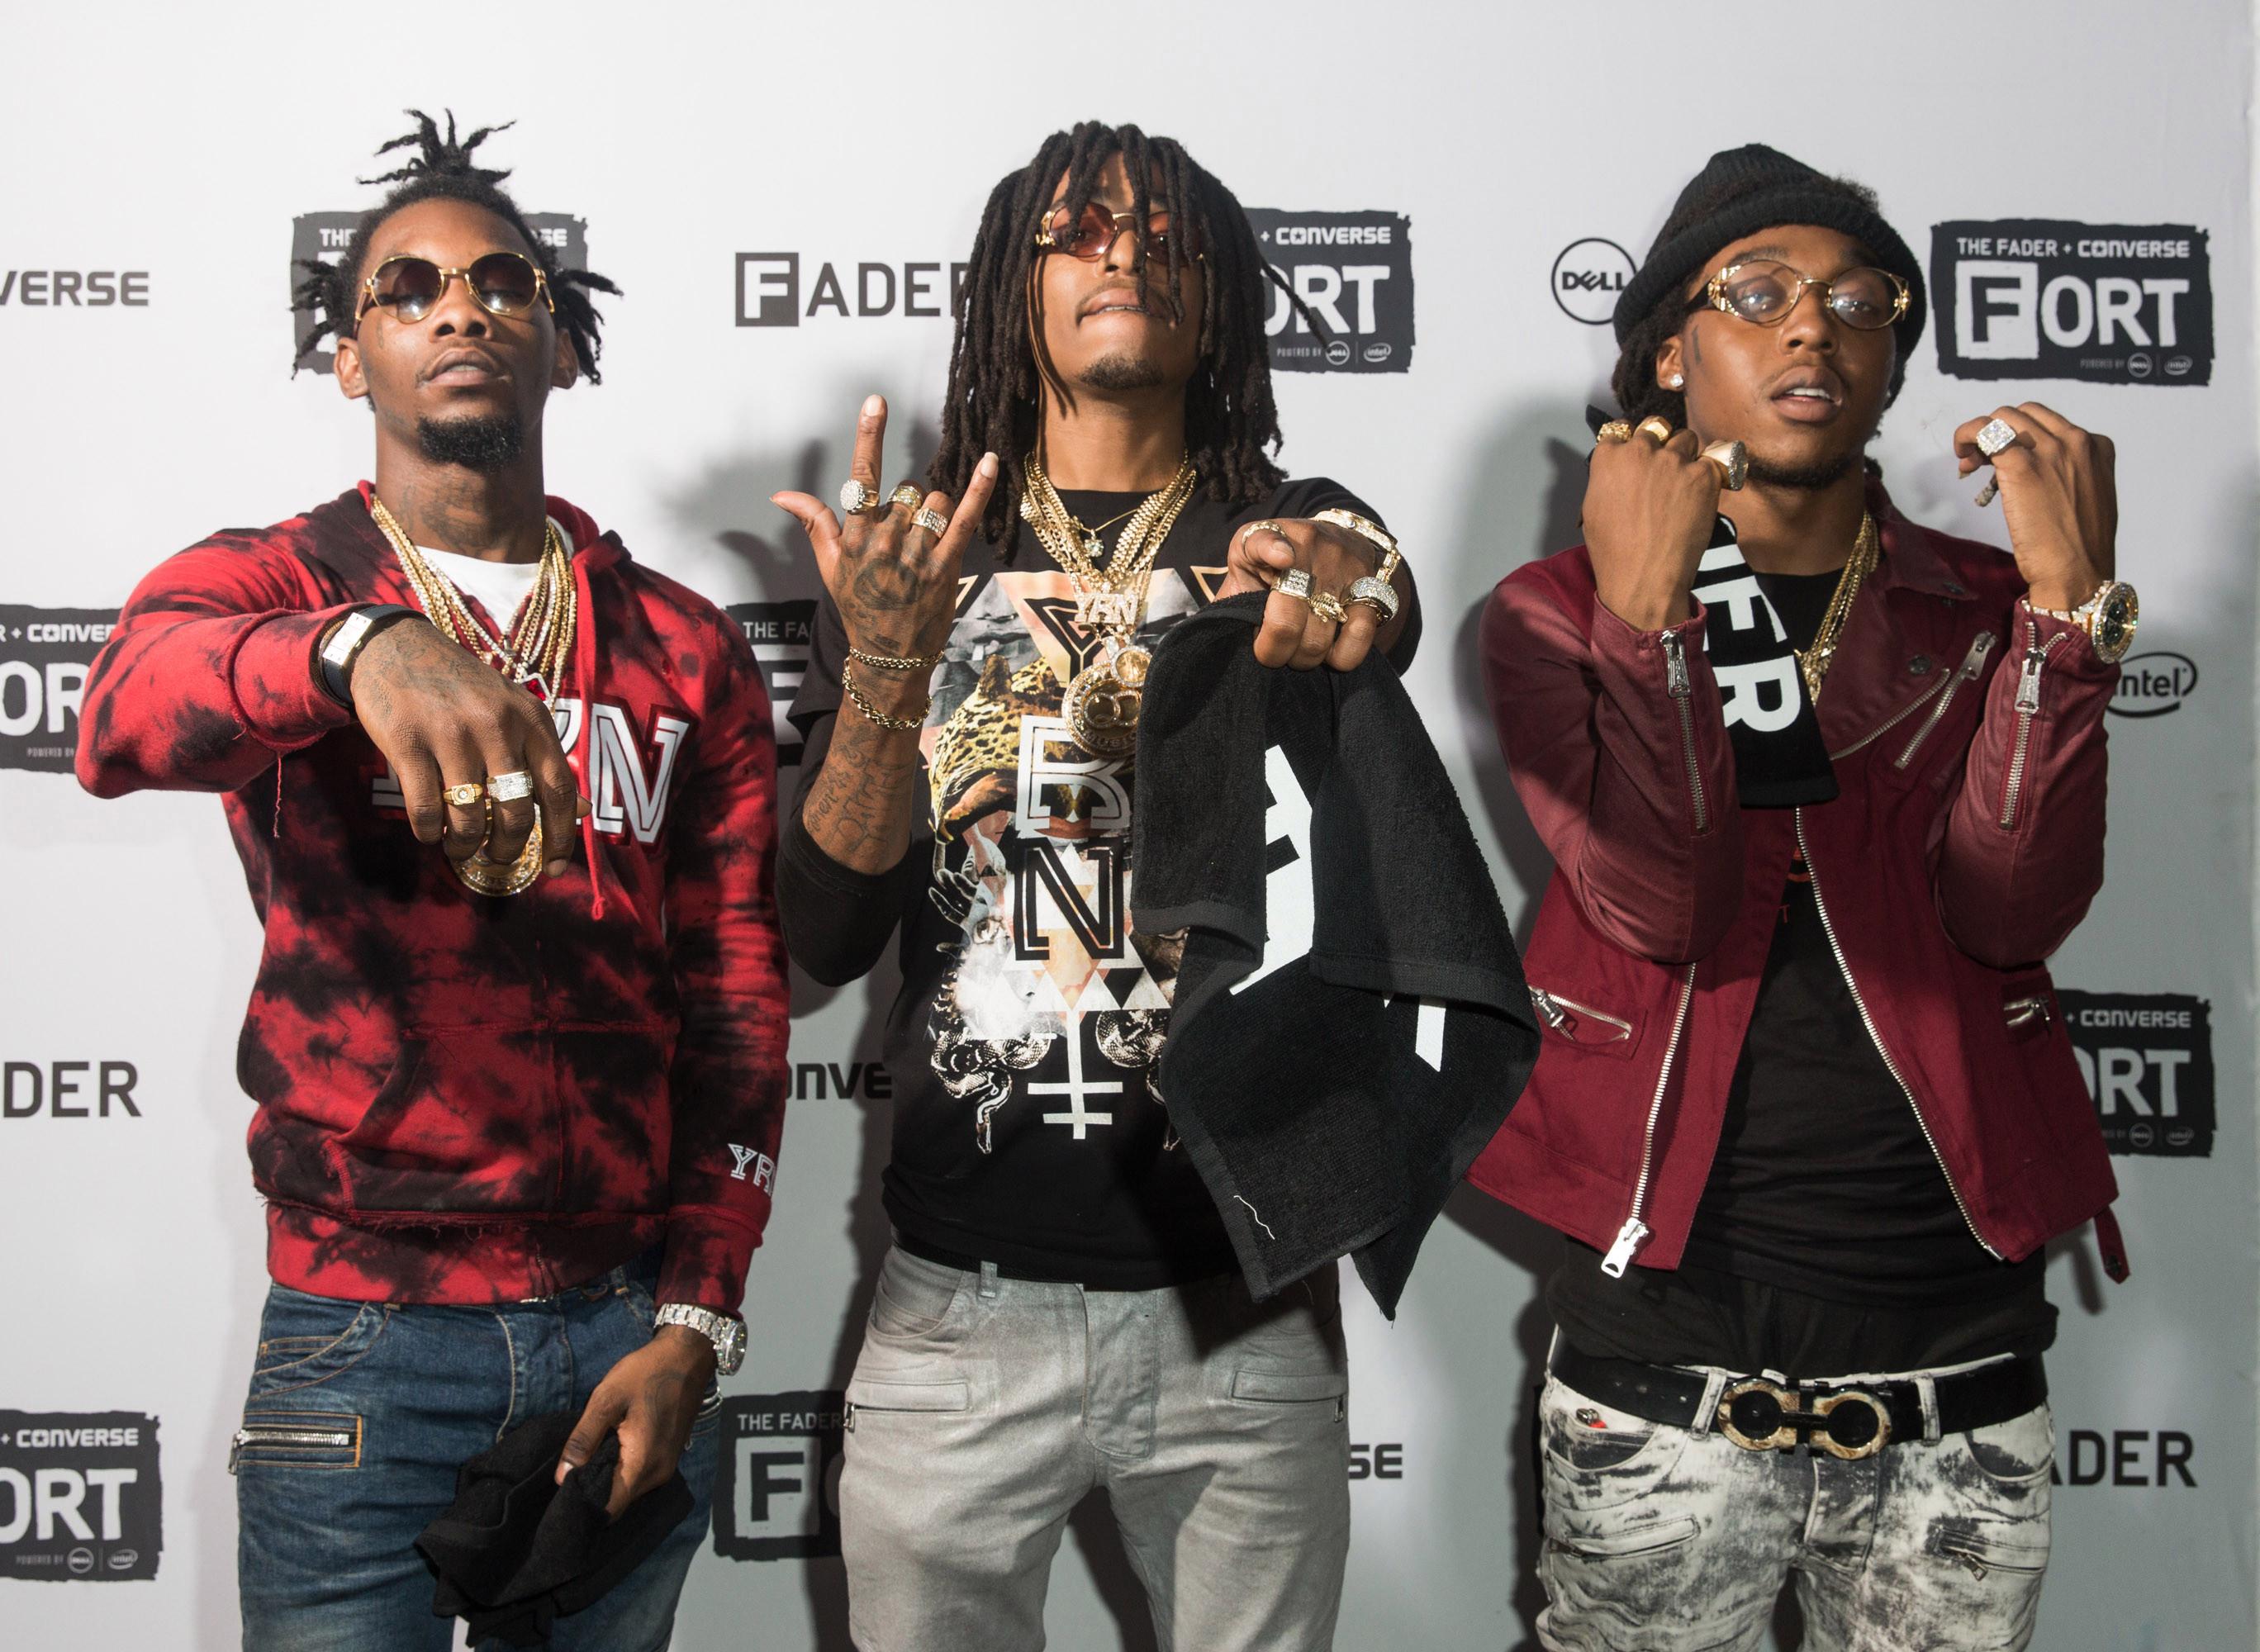 Migos Members Arrested on Guns, Drugs Charges After Concert